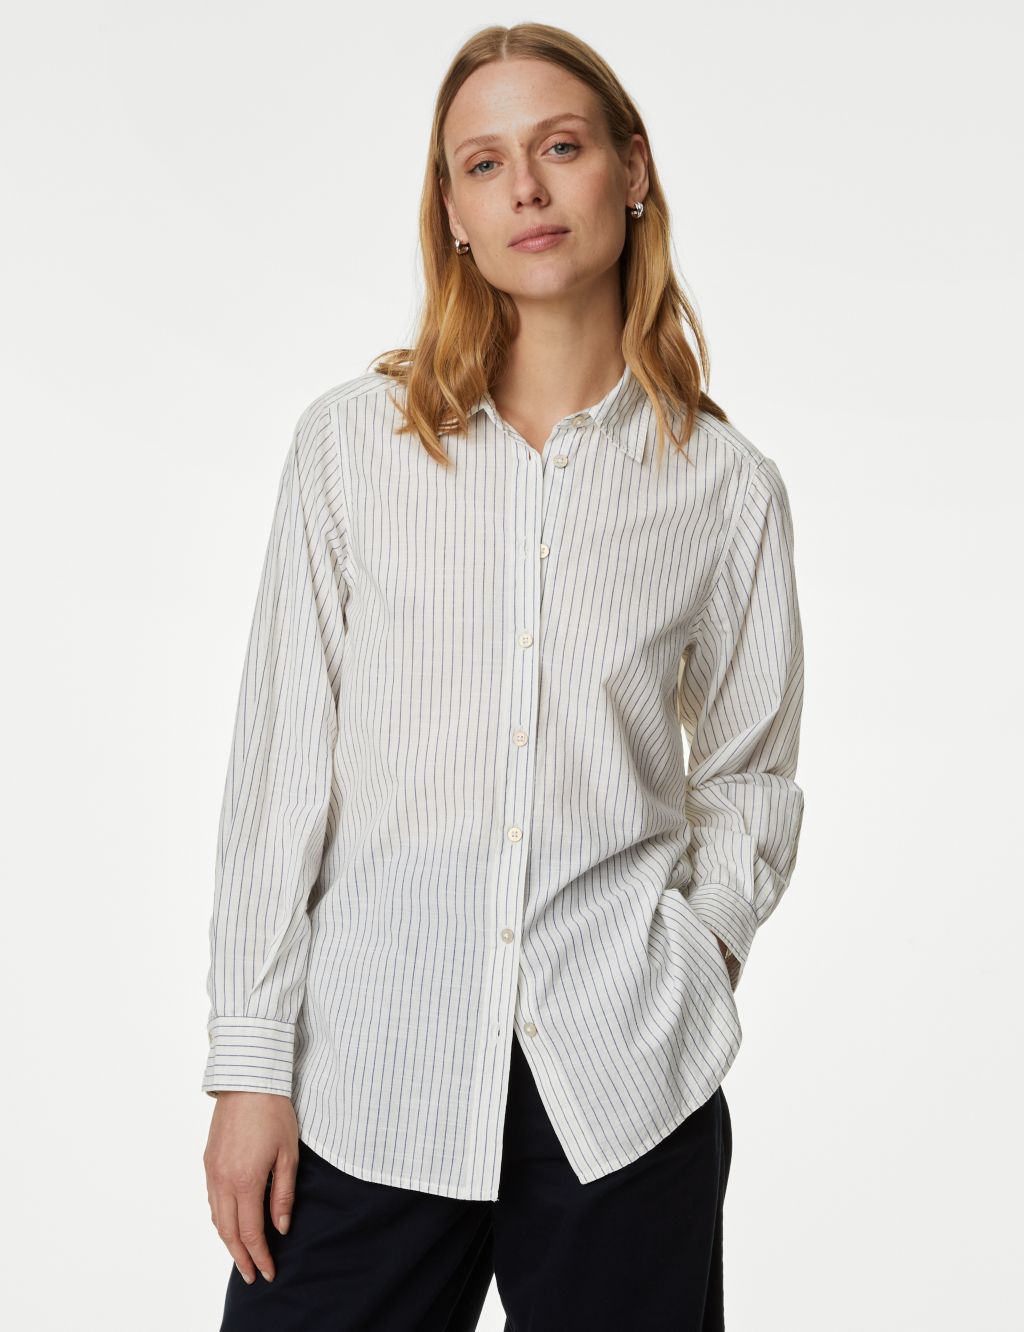 Pure Cotton Striped Collared Shirt image 2